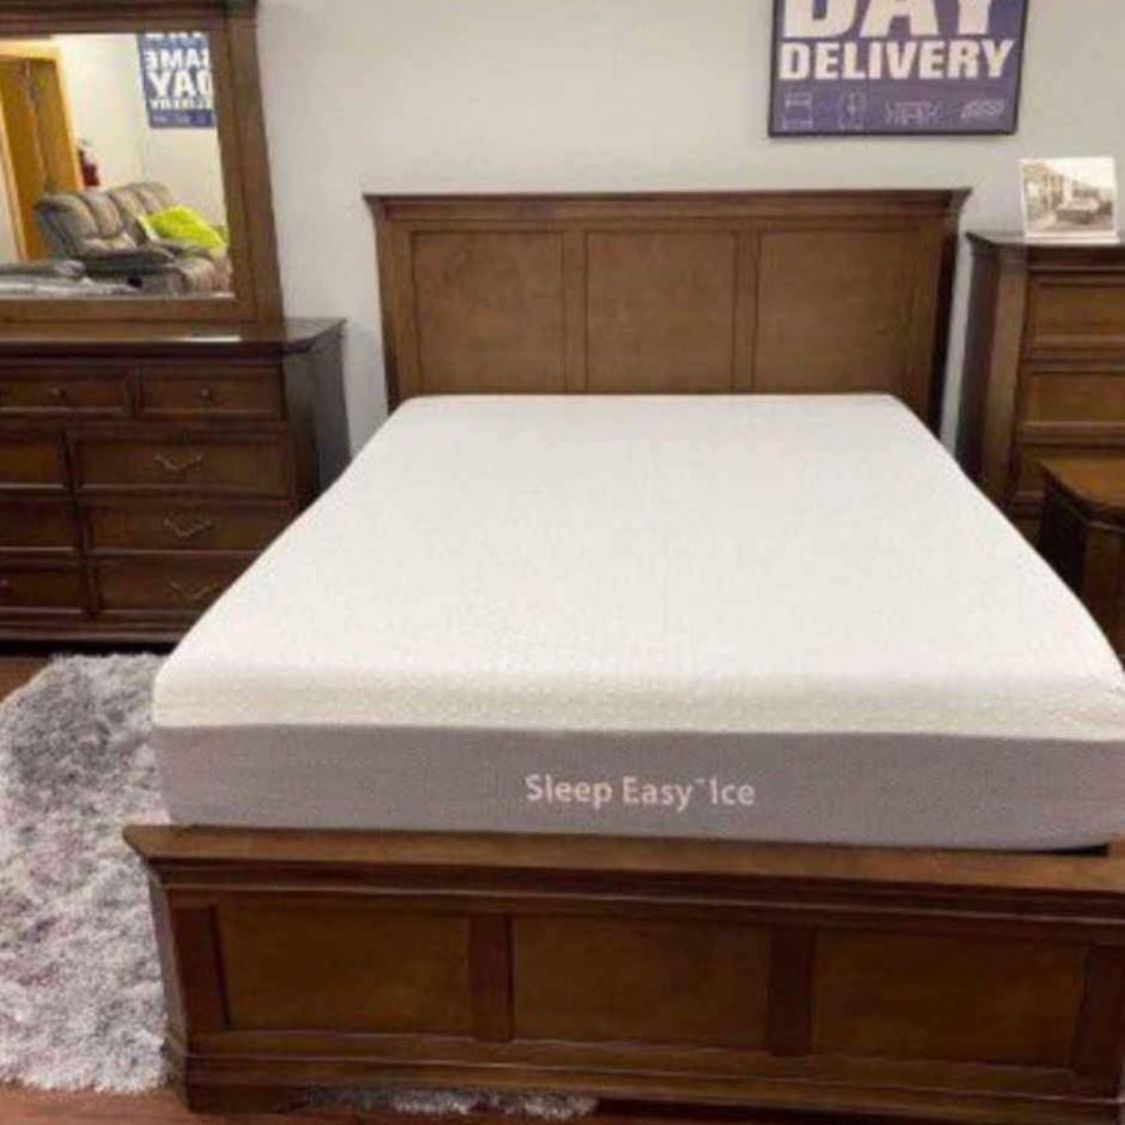 Spring Sale! Sherry King Size Solid Wood Bedroom Set Only $1099. Easy Finance Option. Same-Day Delivery.